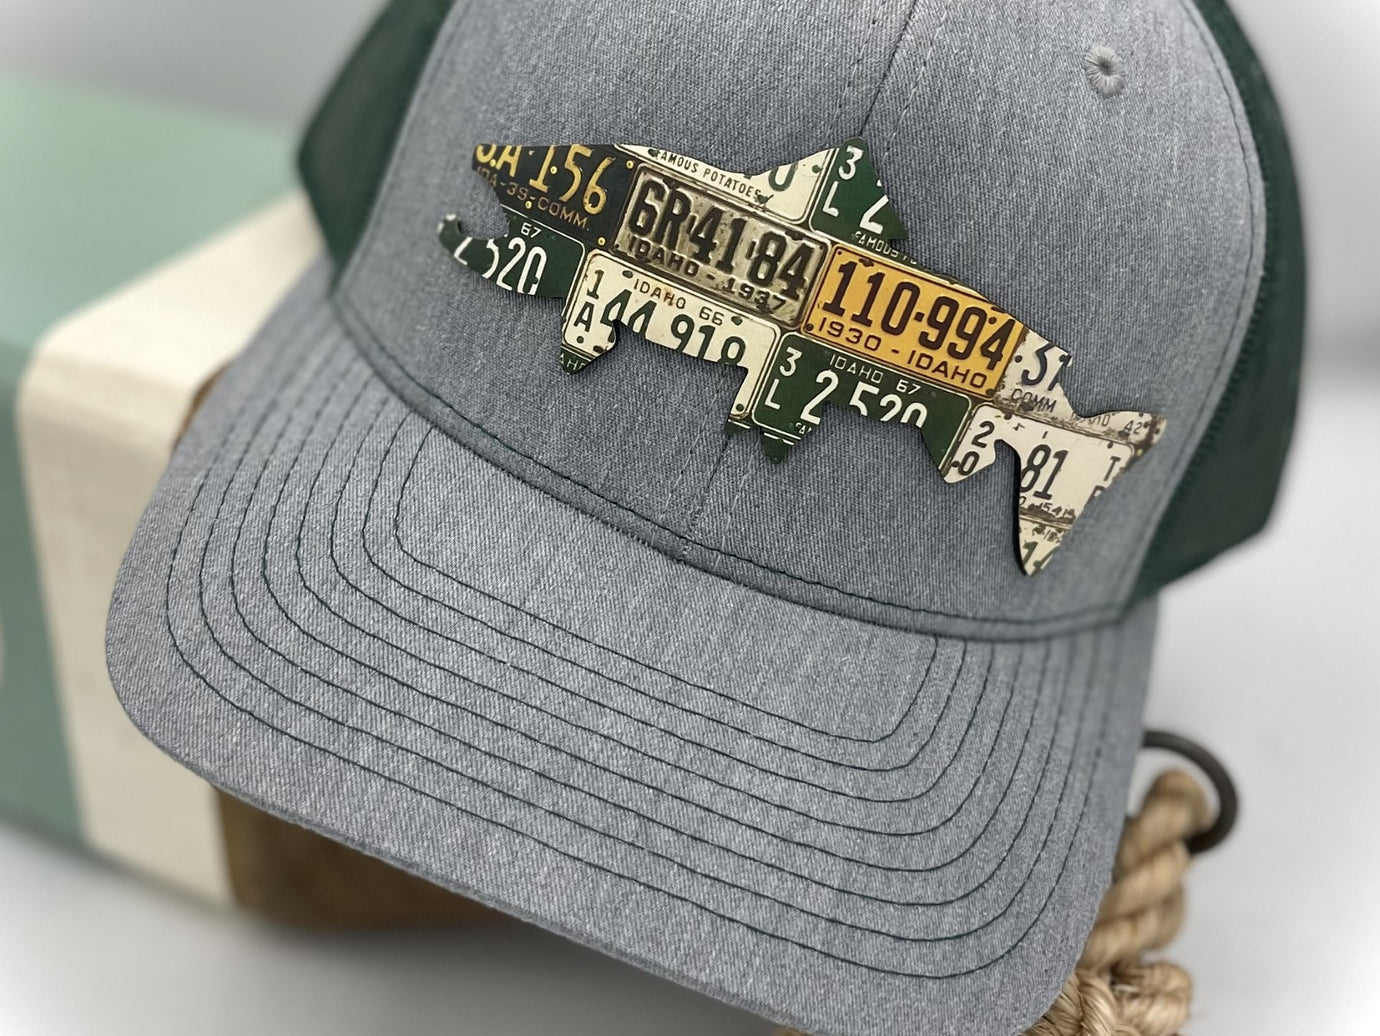 FISHPOND CRUISER TROUT FULL BACK HAT - FRED'S CUSTOM TACKLE